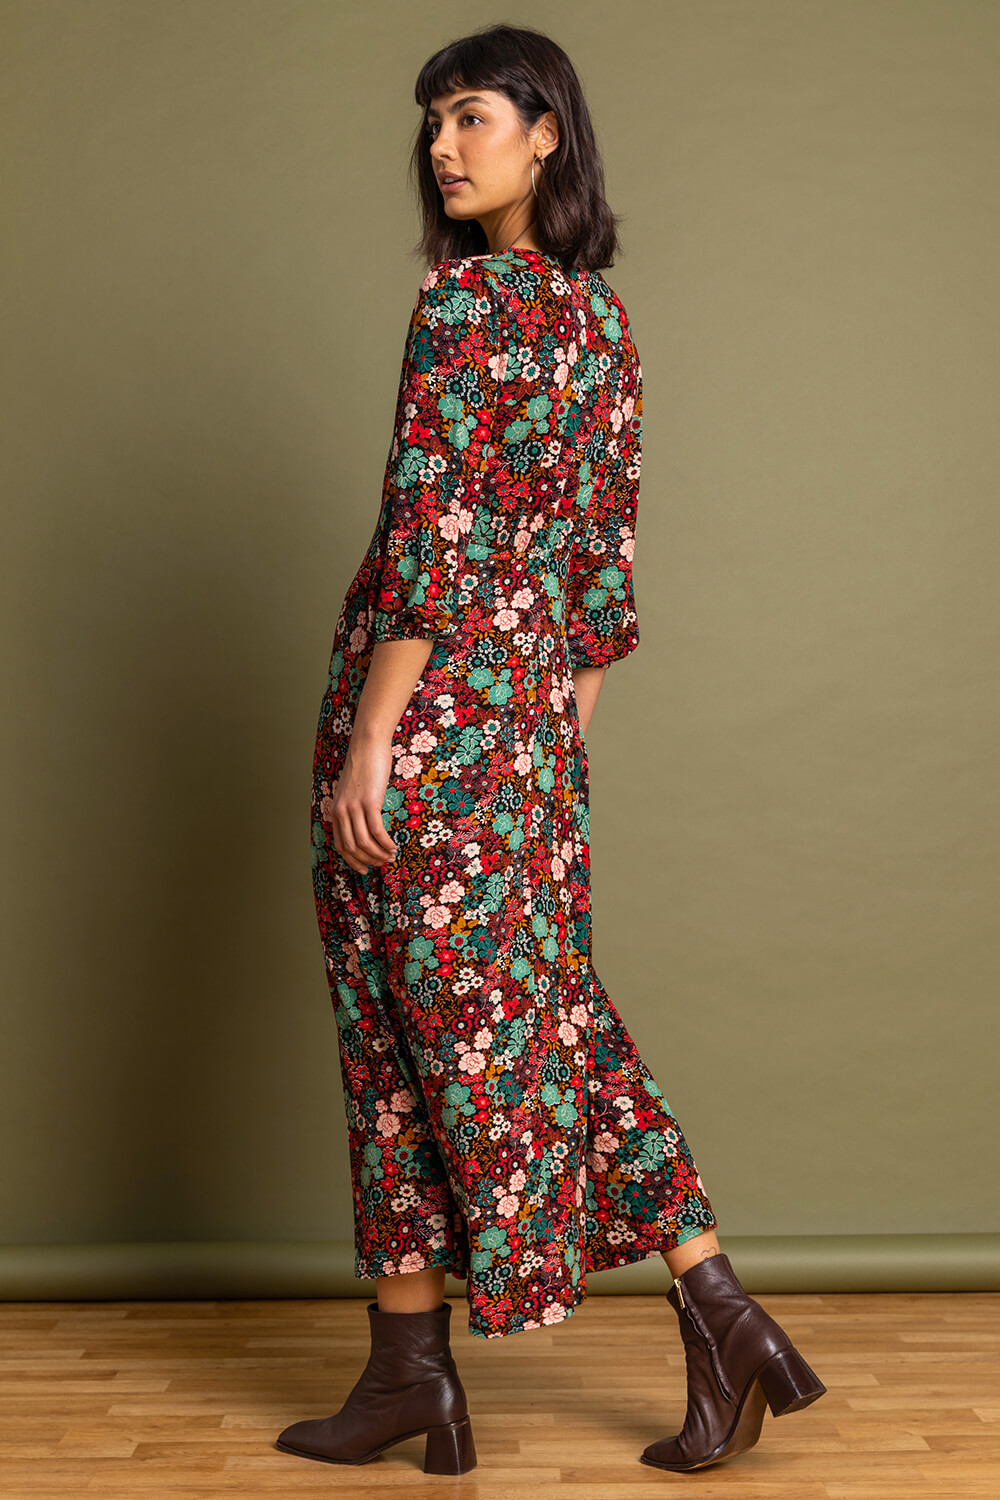 Rust Floral Print Tie Front Midi Dress, Image 2 of 5